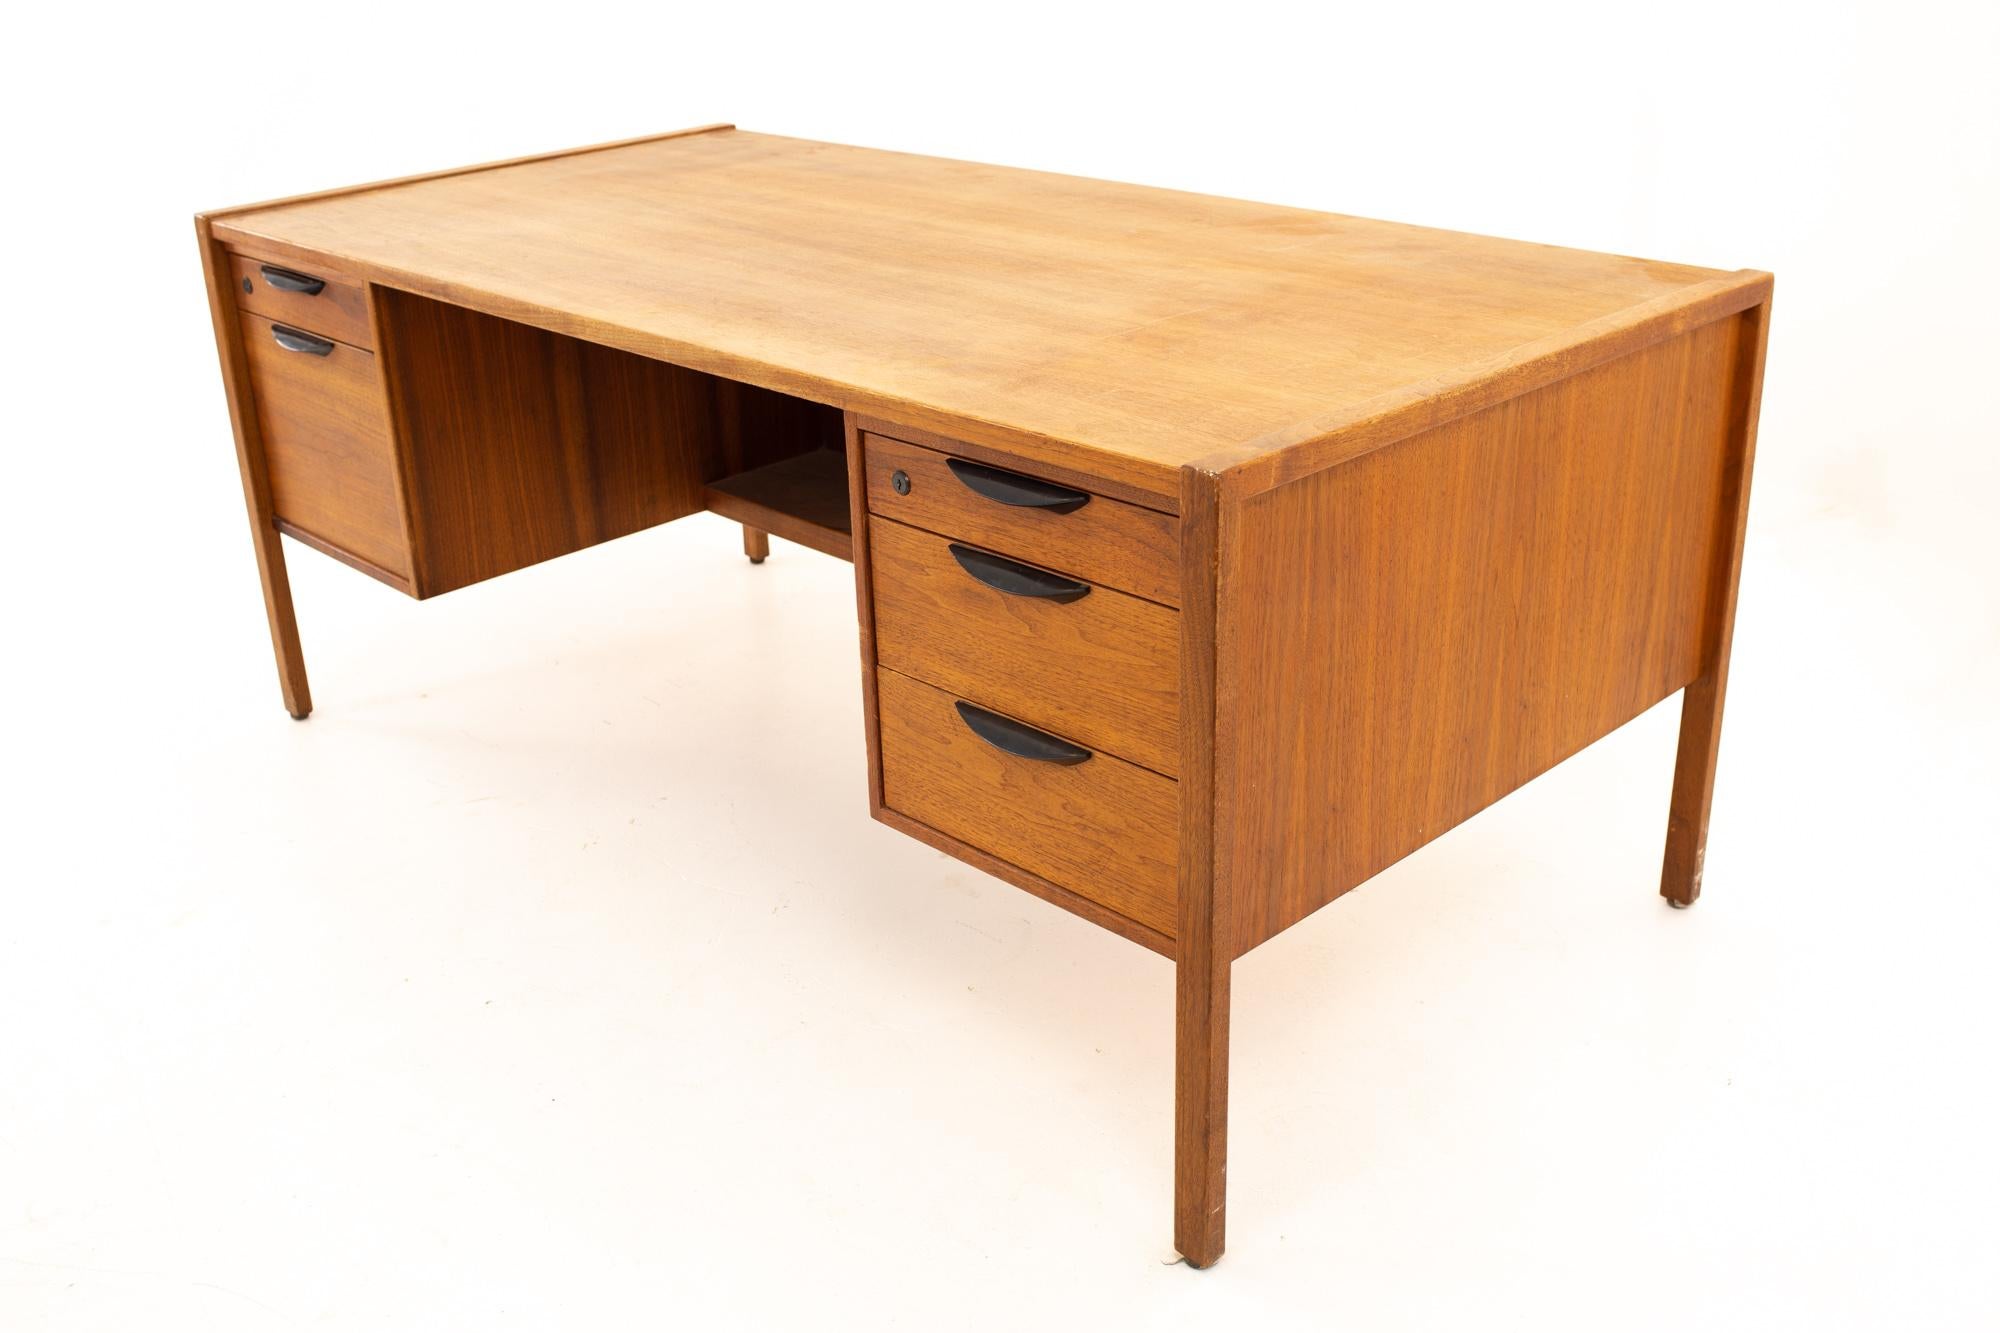 Jens Risom mid century 5 drawer walnut executive desk
Desk measures: 68 wide x 34.25 deep x 28.5 high

All pieces of furniture can be had in what we call restored vintage condition. That means the piece is restored upon purchase so it’s free of